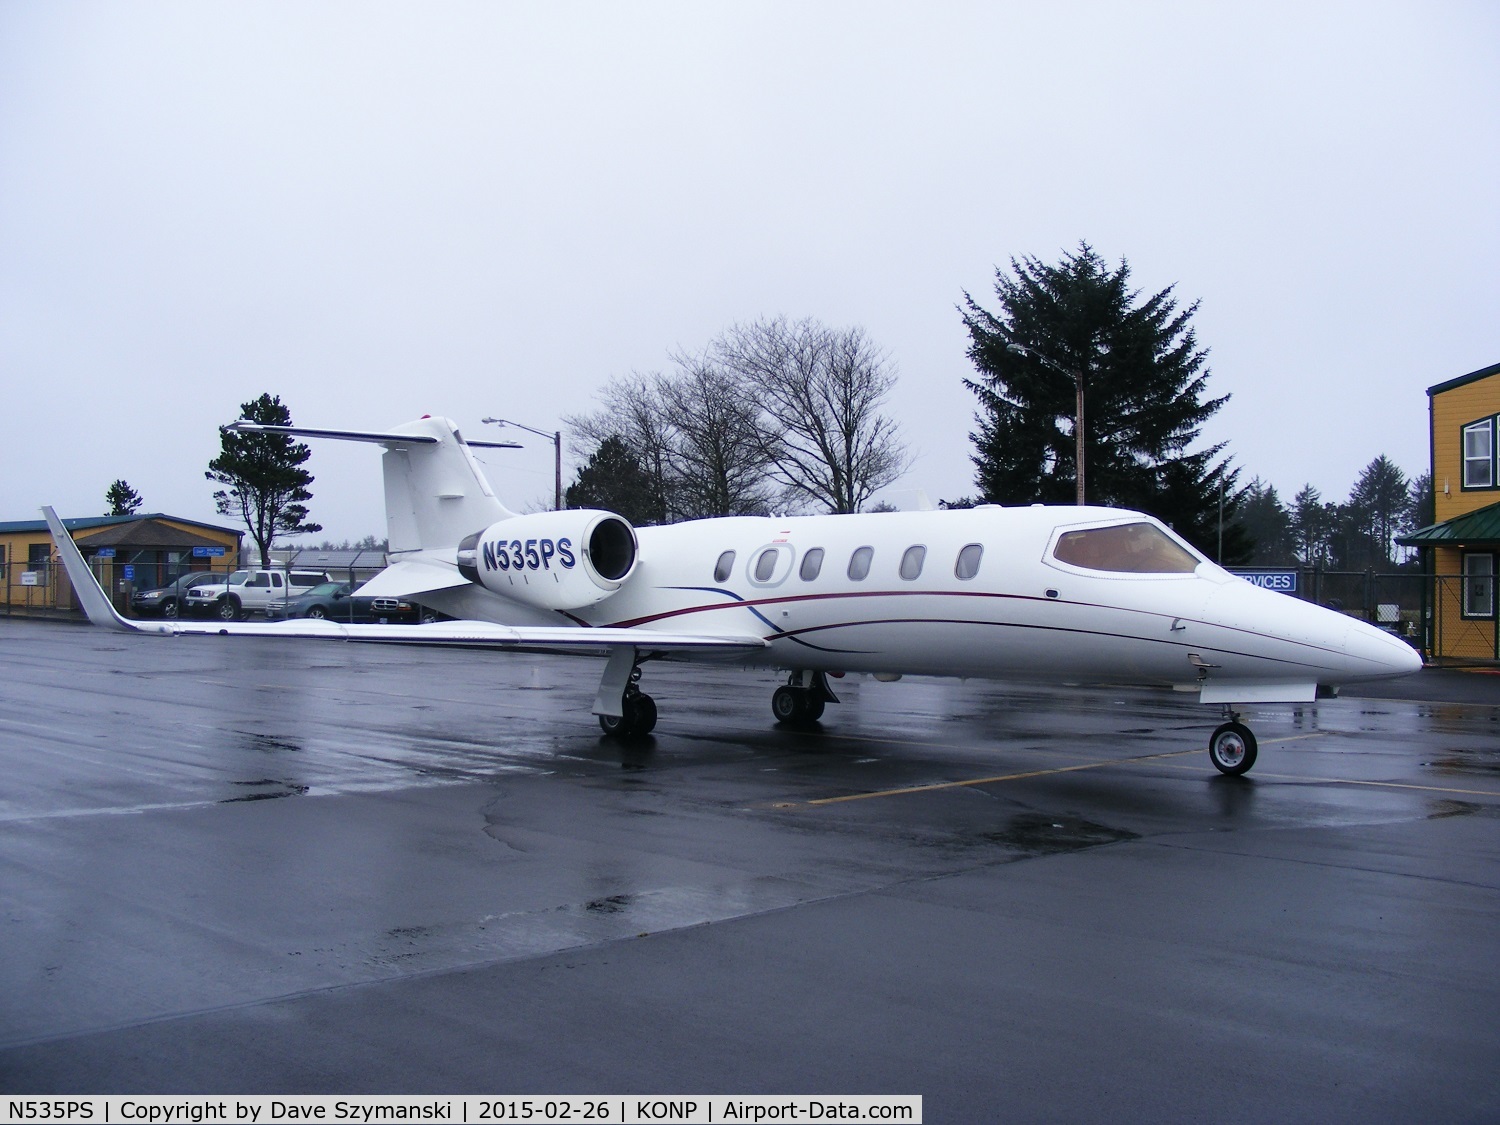 N535PS, 1999 Learjet 31A C/N 087, sitting on the ramp at Newport, Oregon